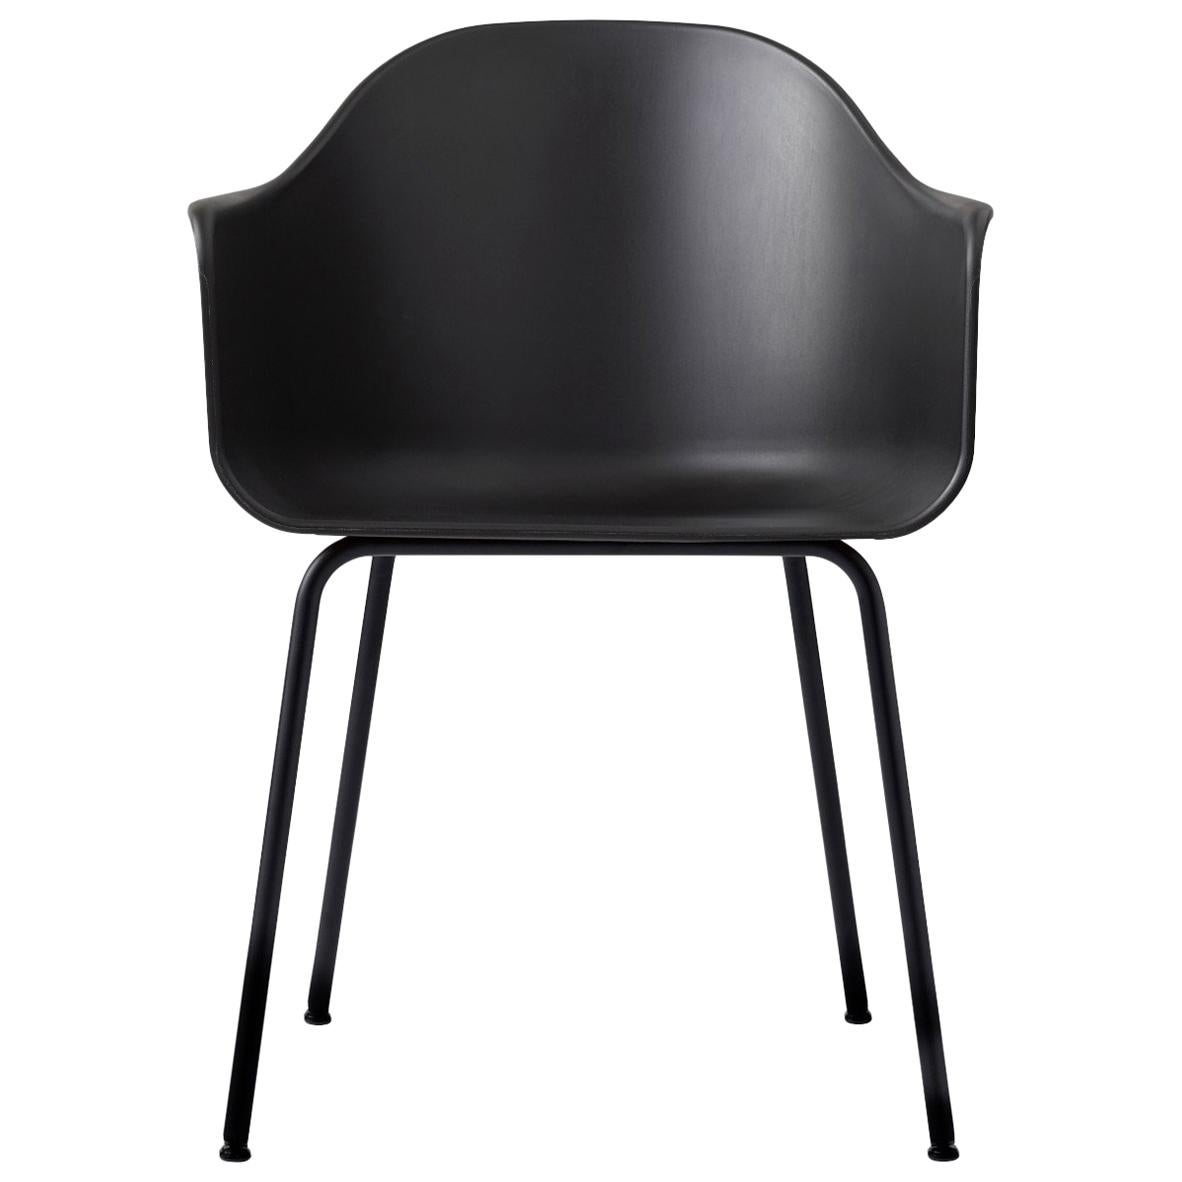 Harbour Chair, Legs in Black Steel and a Shell in Black im Angebot